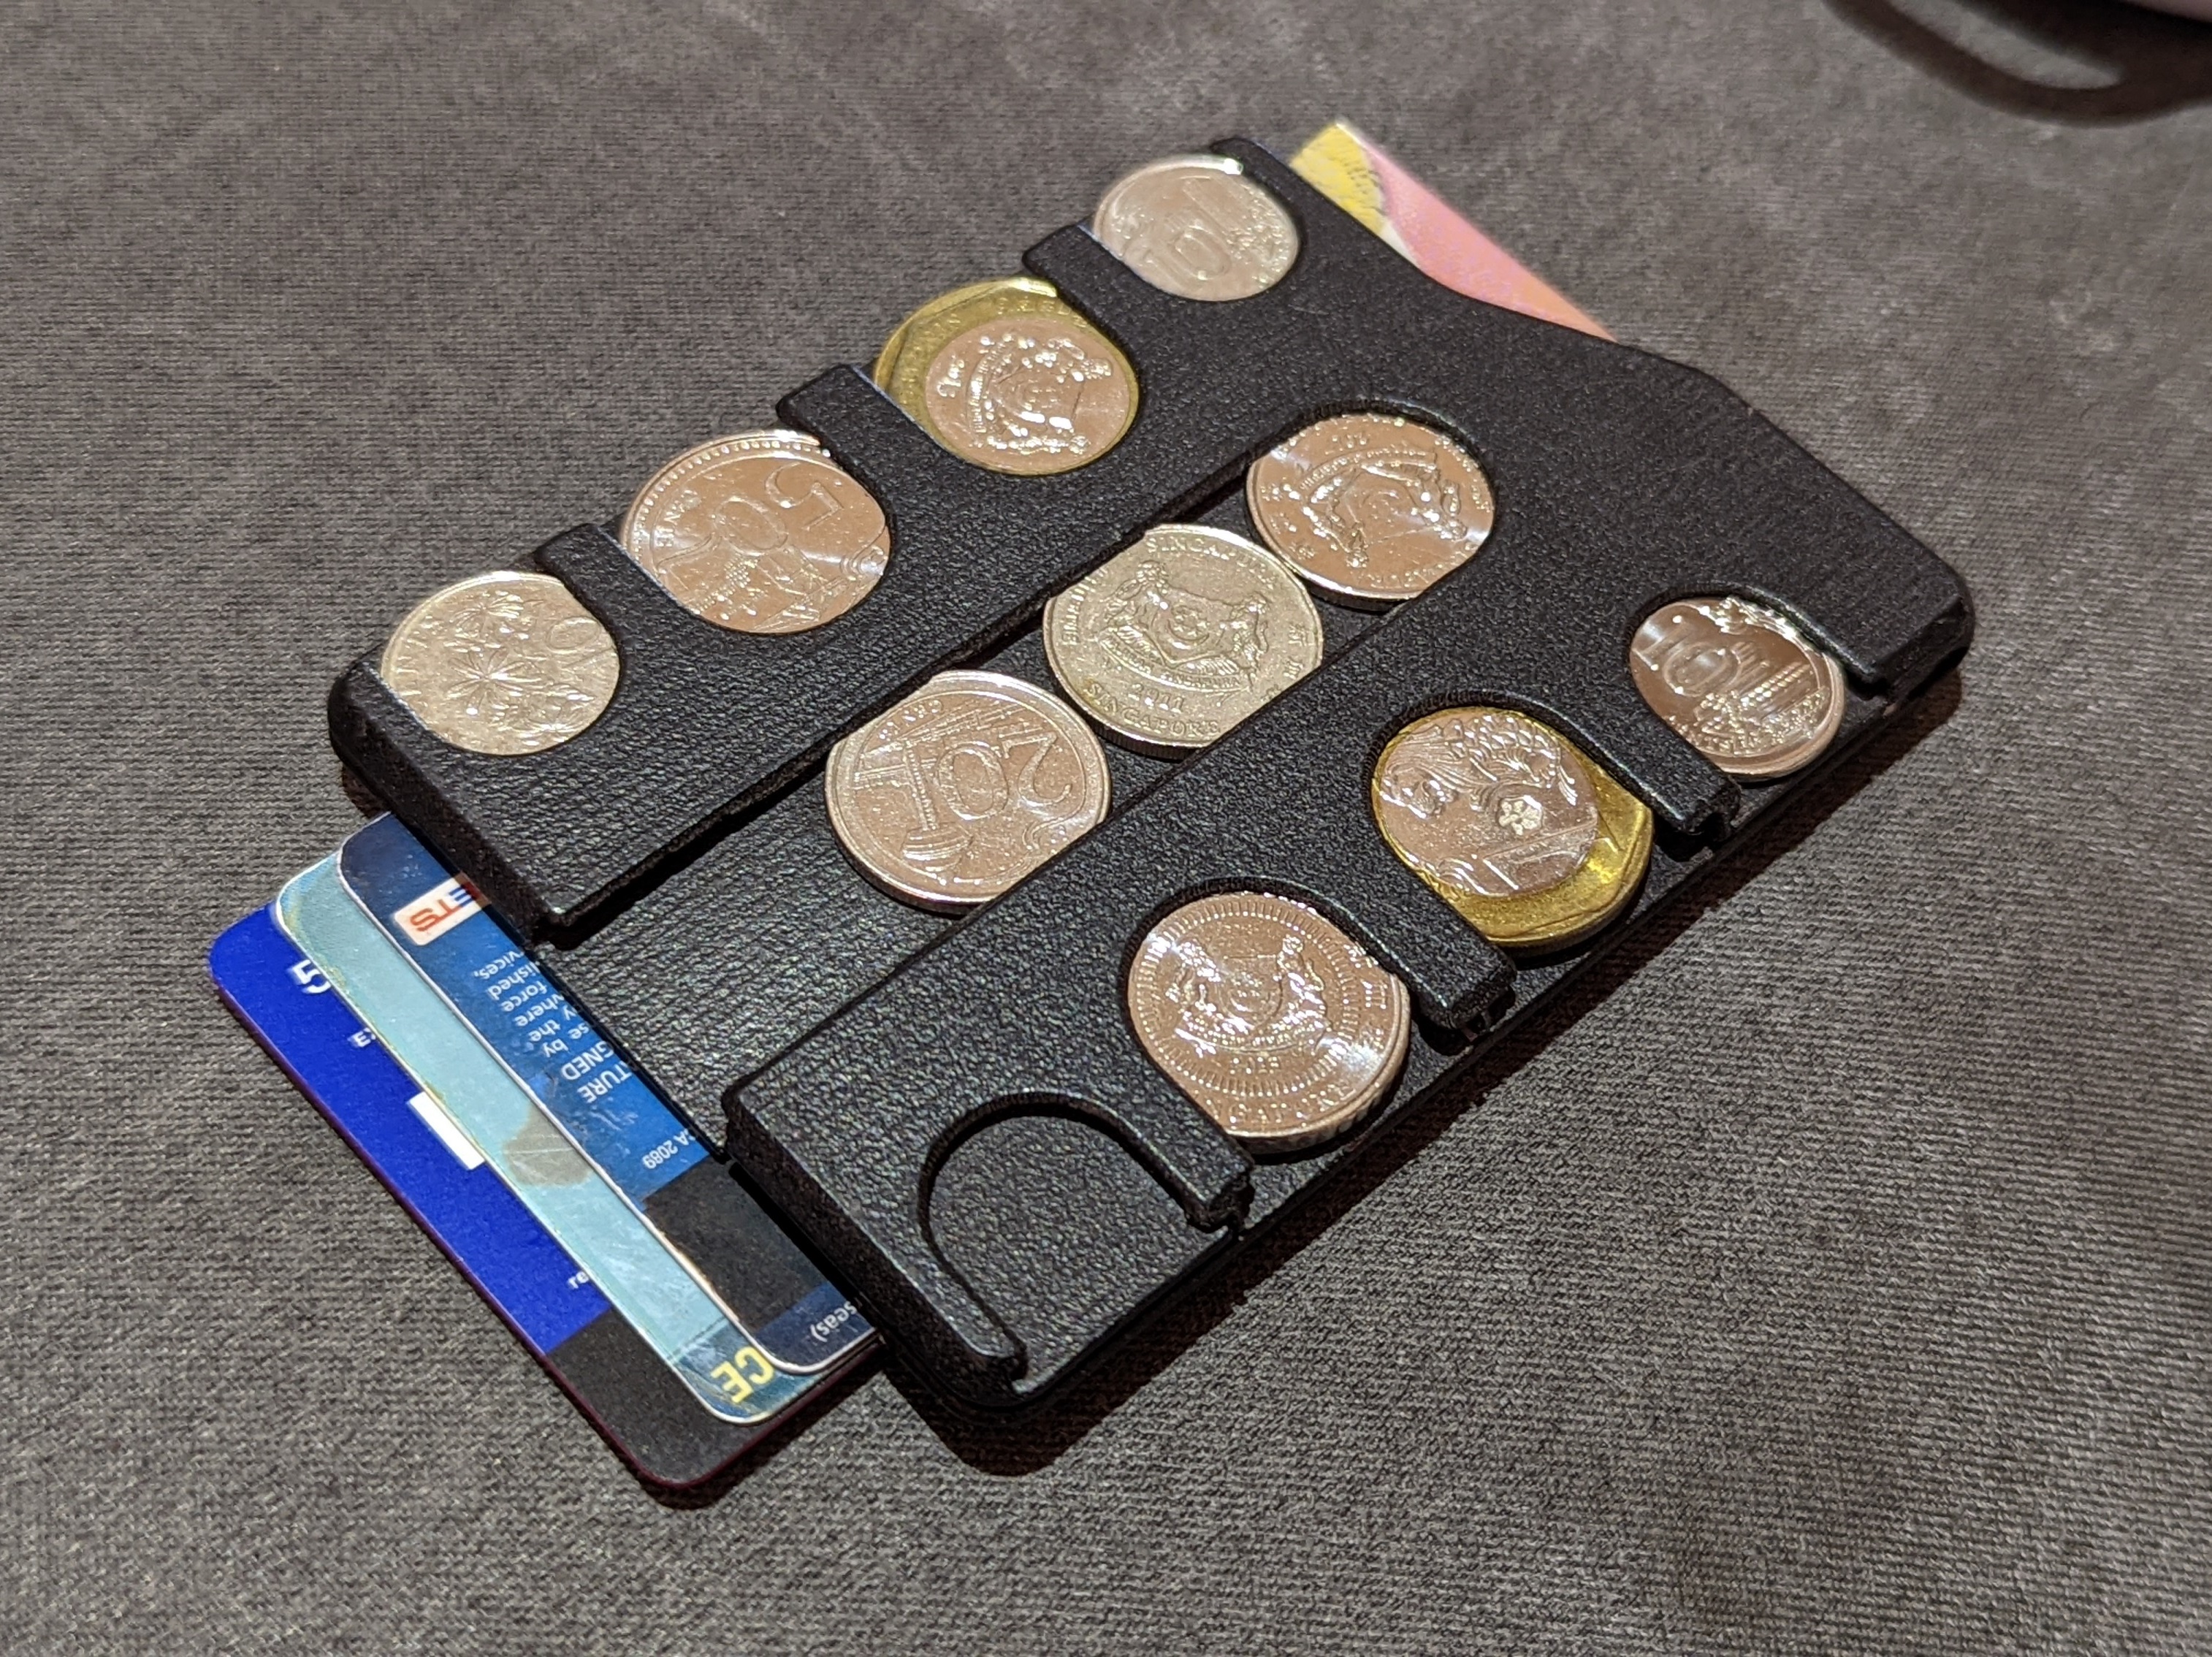 3D Printed Wallet - Cards, Coins, and Cash